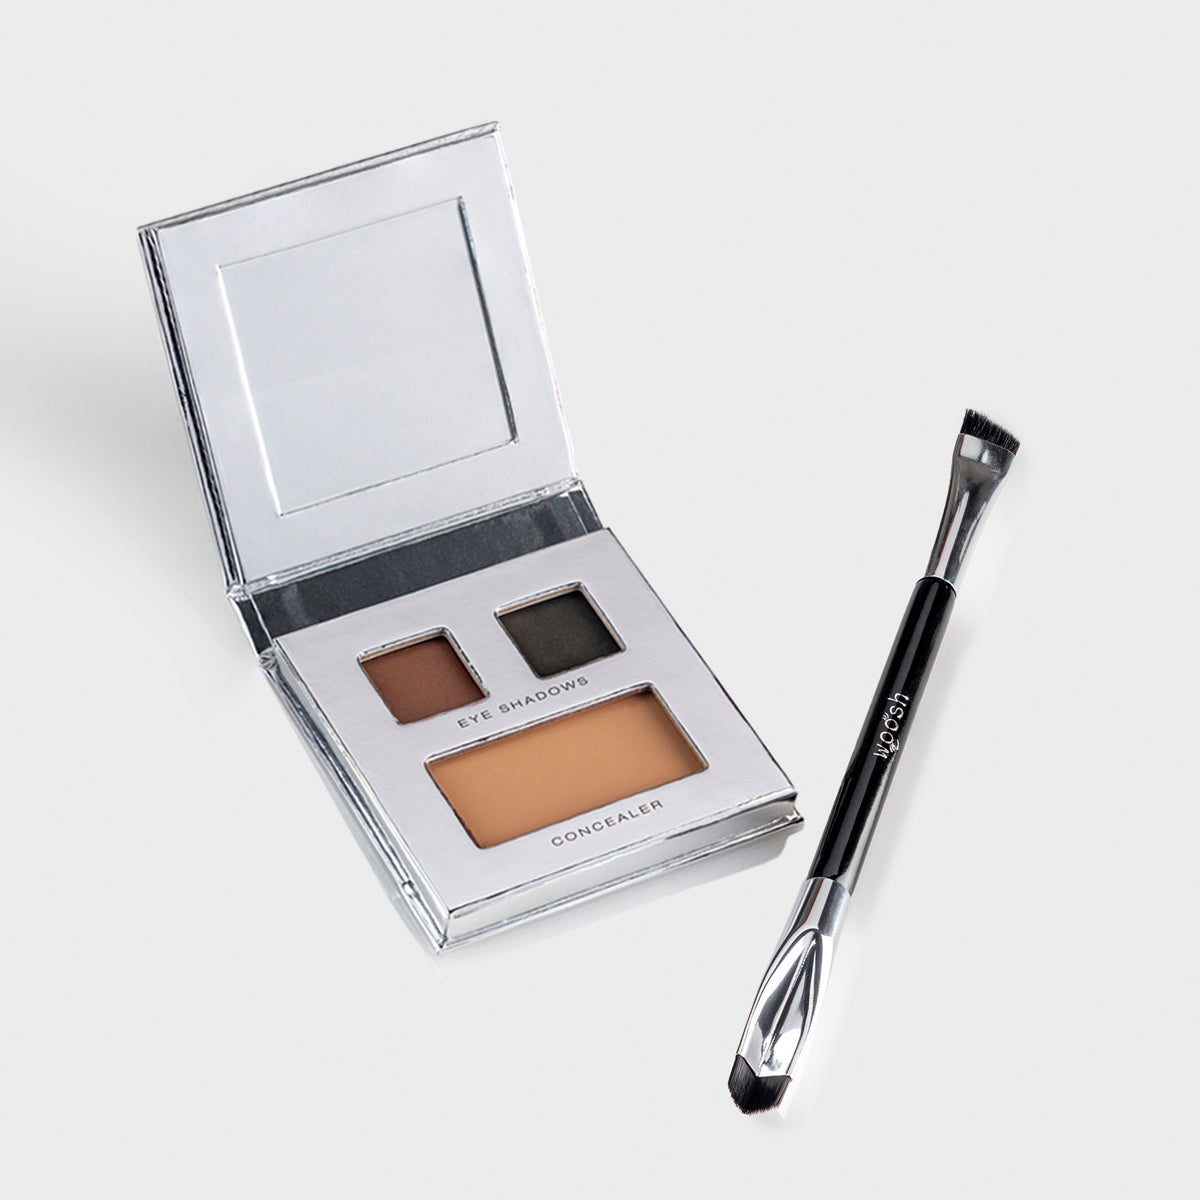 Smokey Eye Palette with two eyeshadows and one latte concealer with the Corner Brush